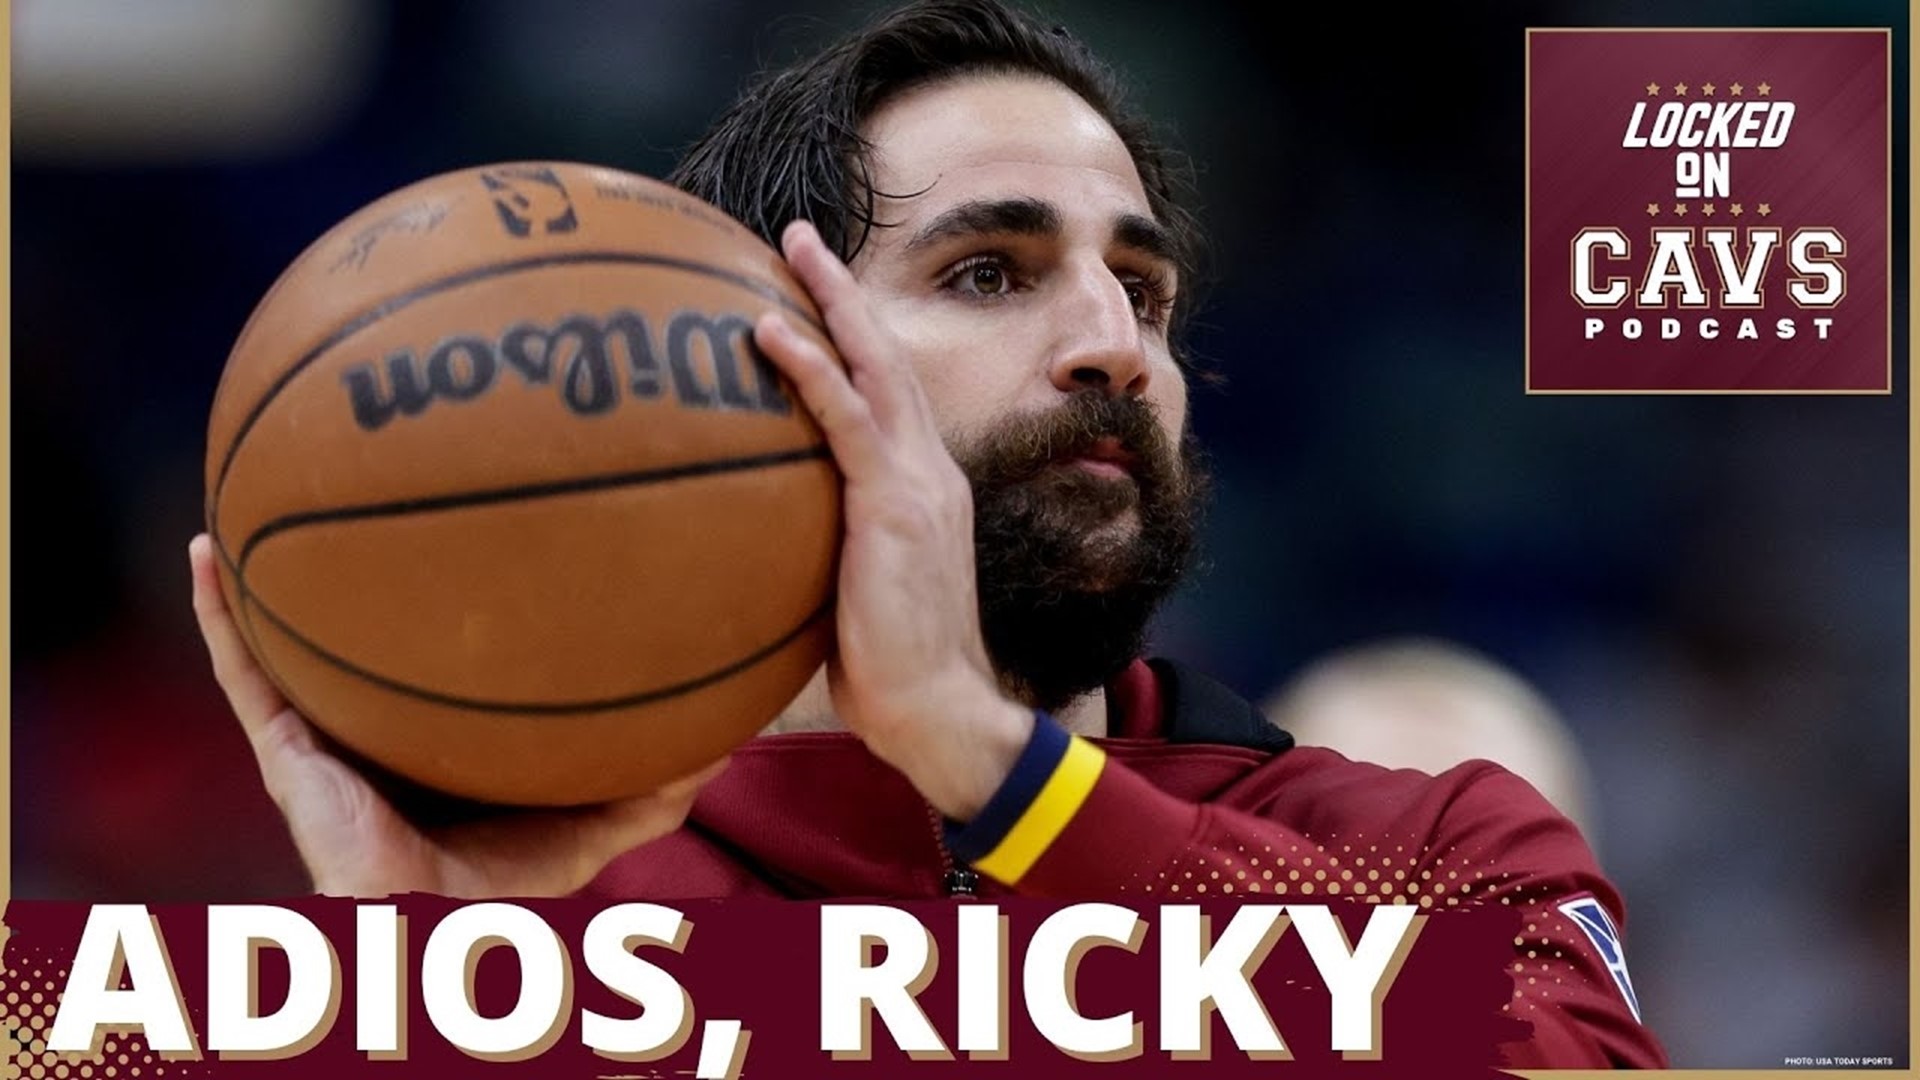 Hosts Chris Manning and Evan Dammarell react to the news that Ricky Rubio has been bought out by the Cavs and reflect on Rubio's time in Cleveland.